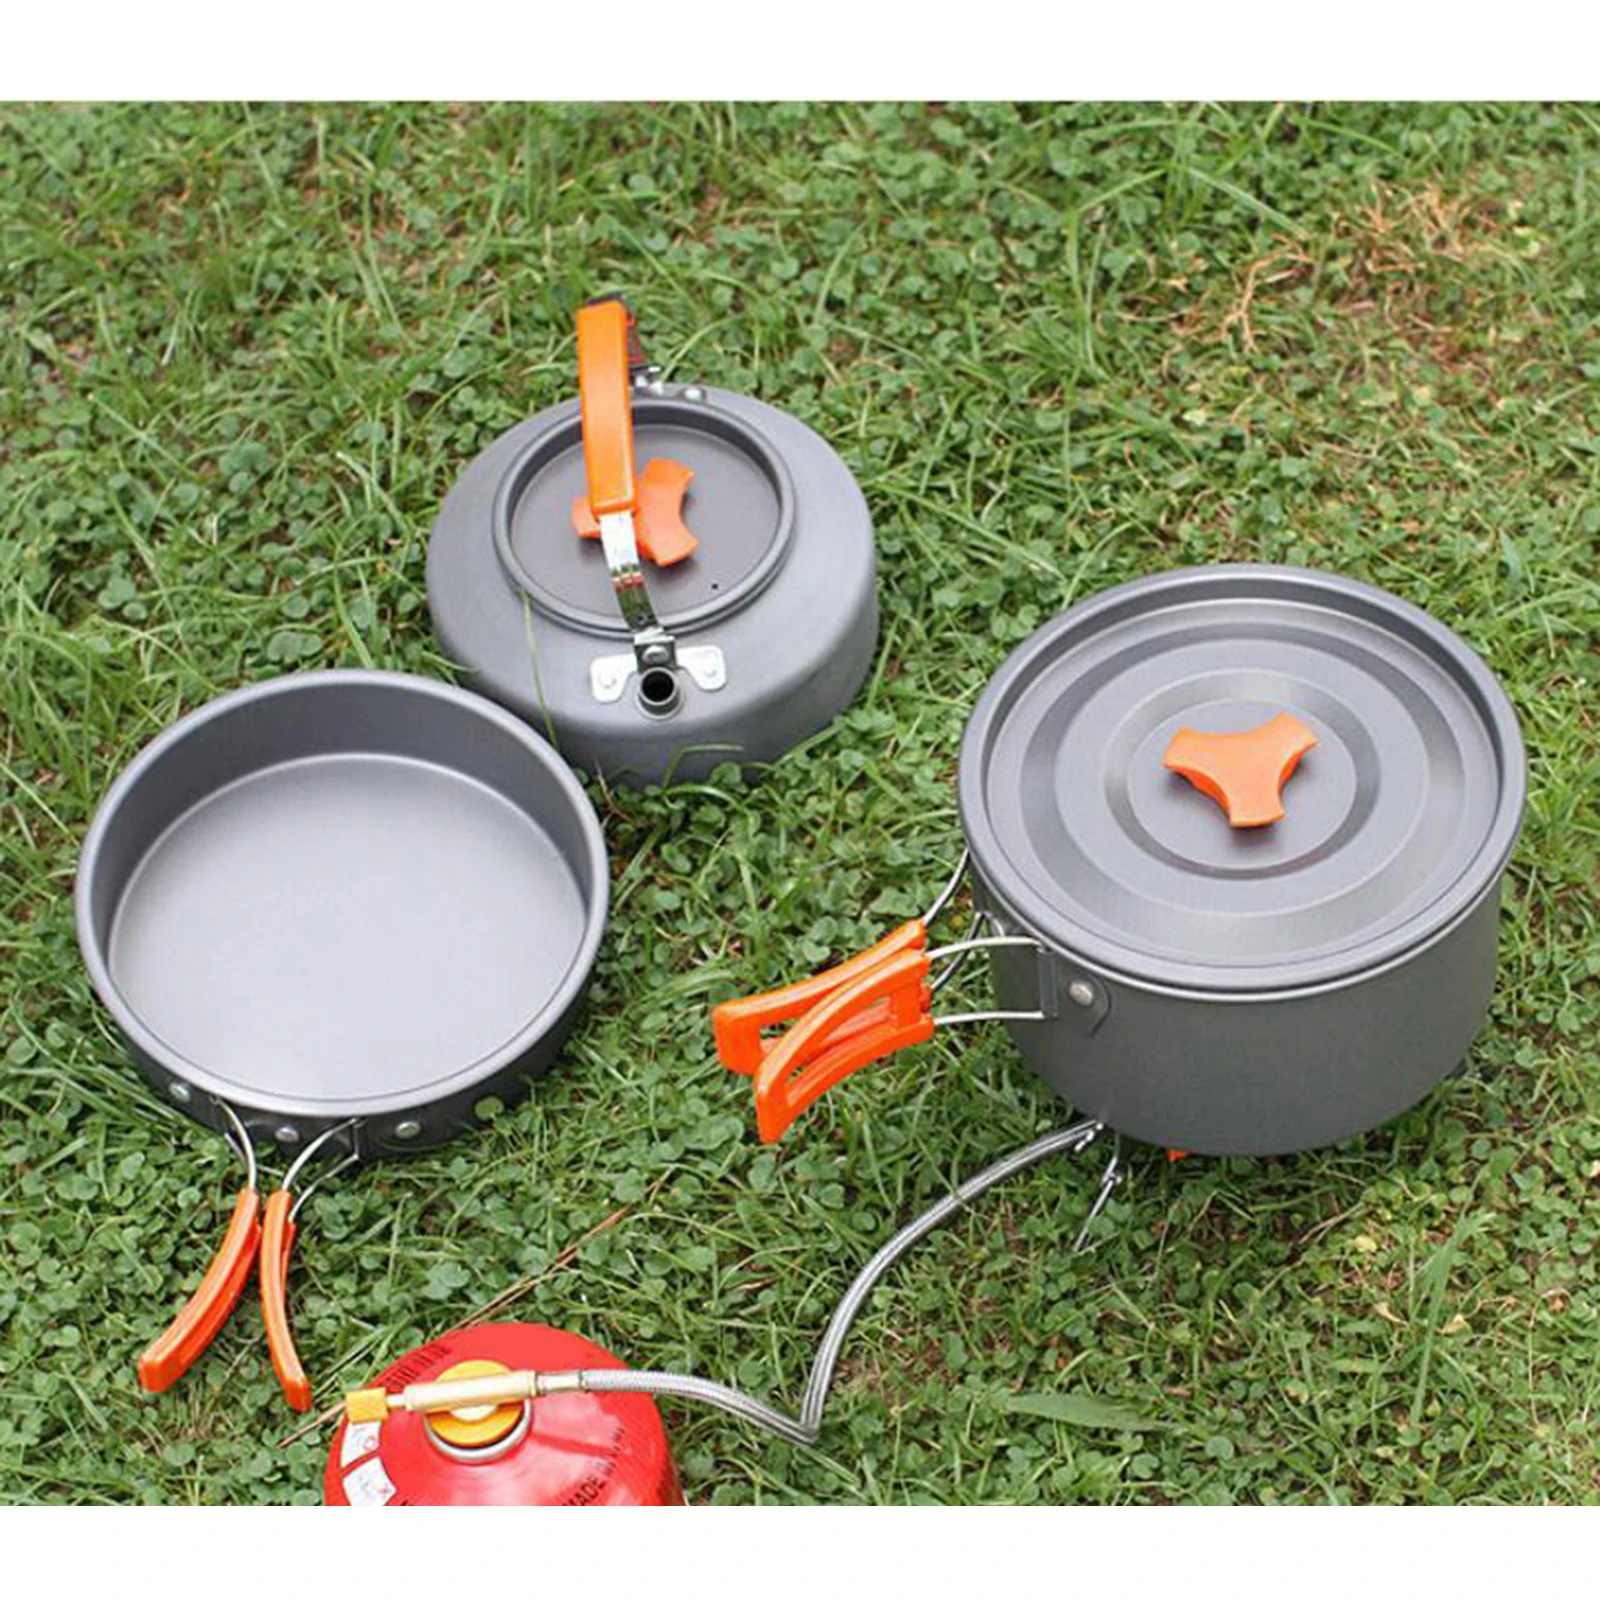 Portable Camping Cookware Mess Kit Outdoor Campfire Cookware for Hiking Backpacking, Folding and Lightweight